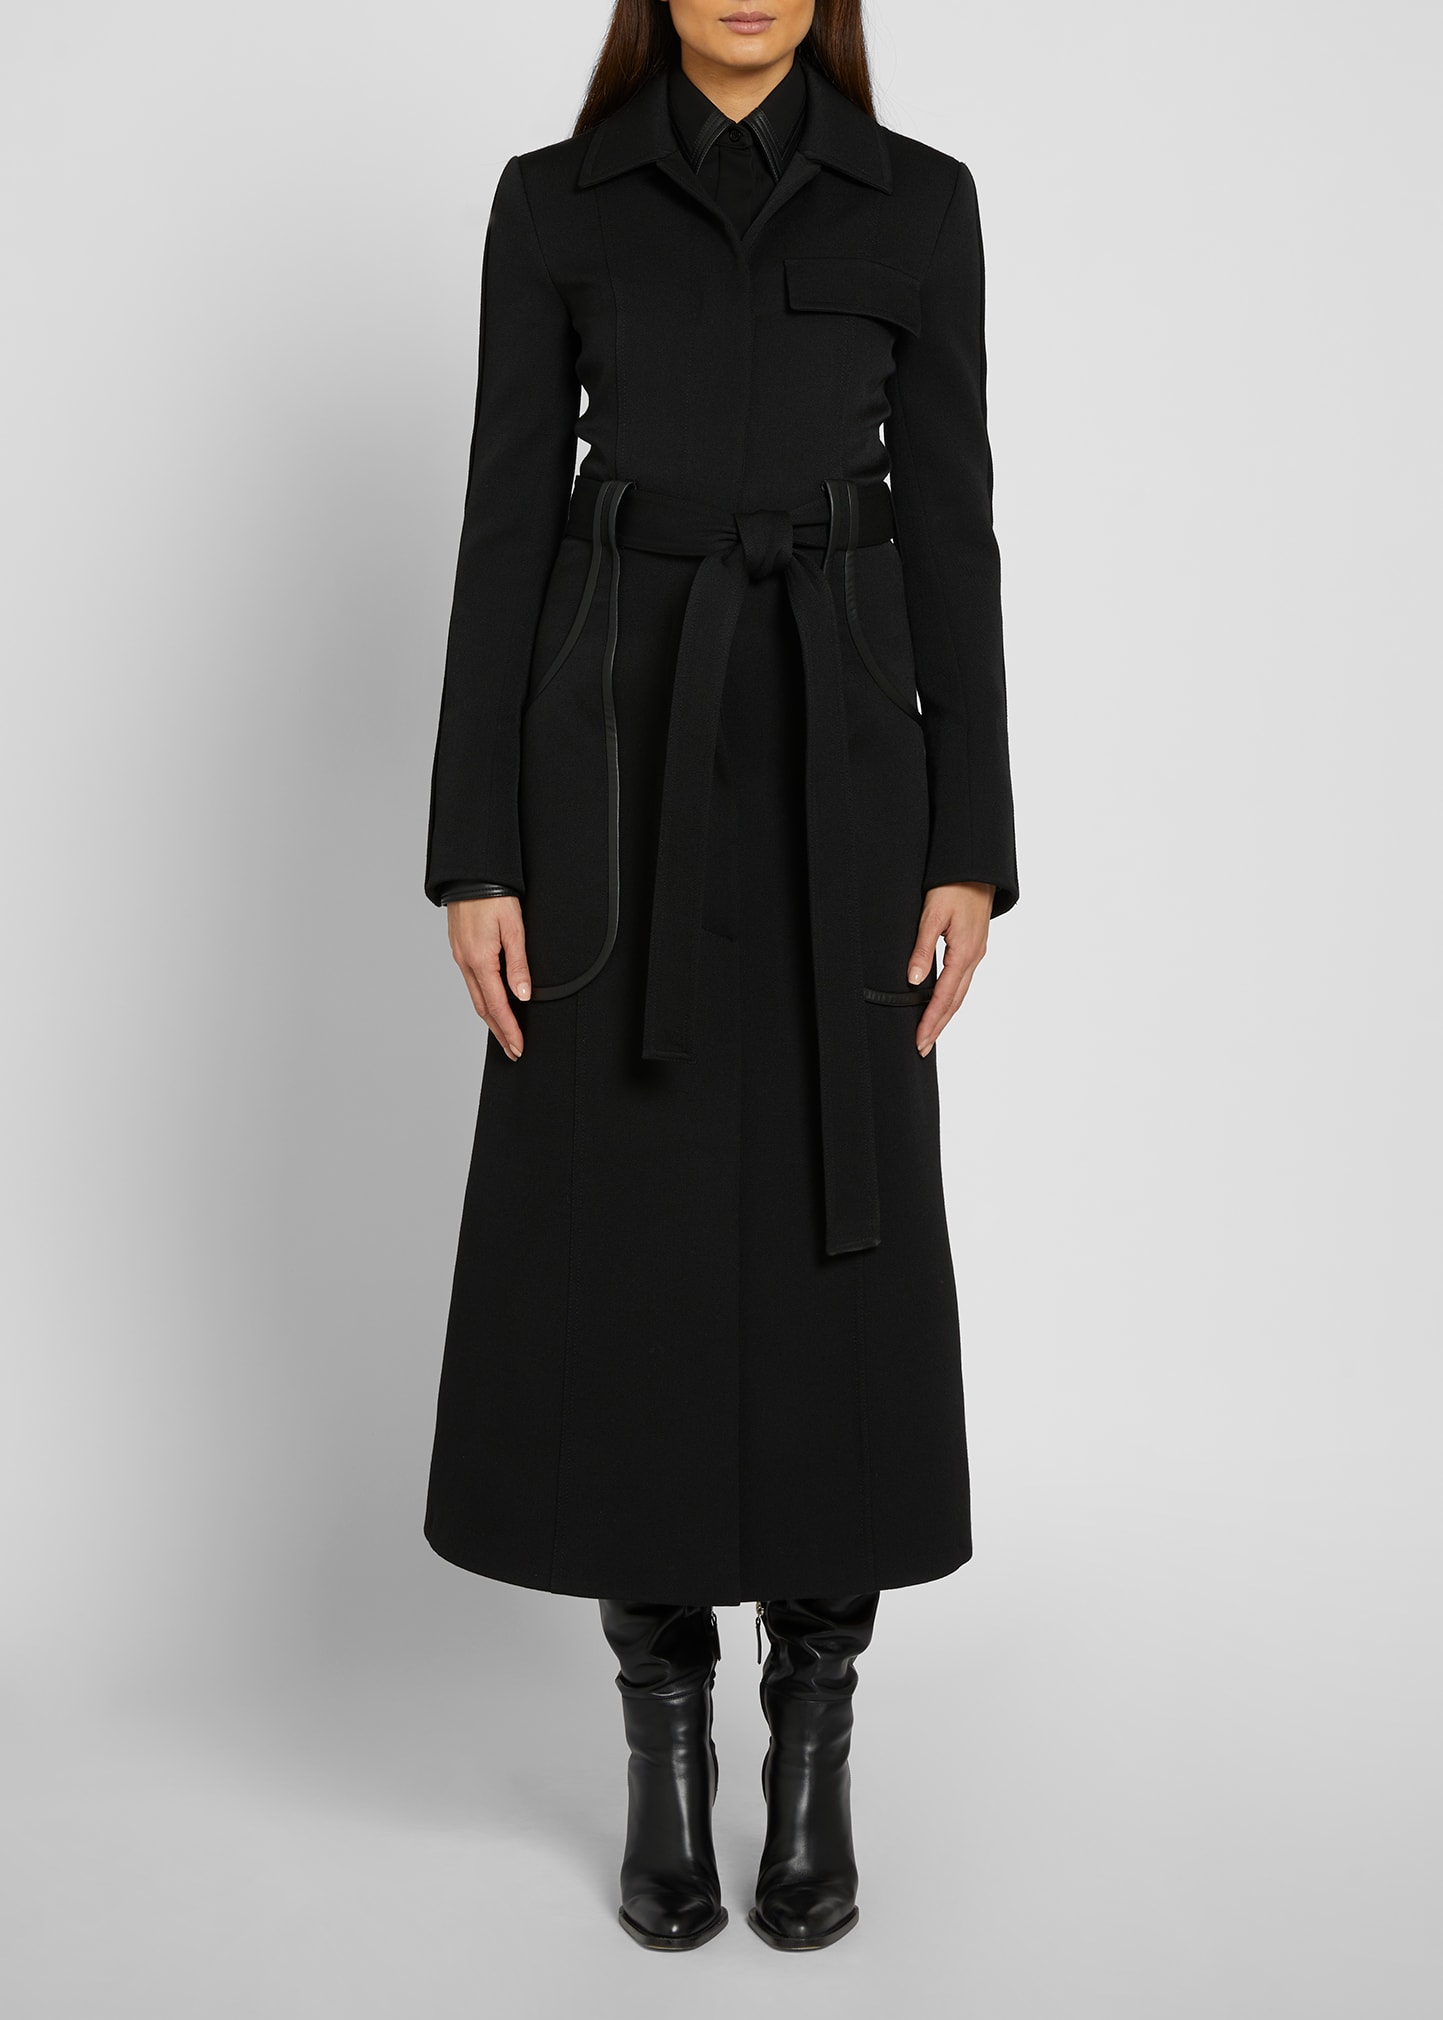 VICTORIA BECKHAM BELTED WOOL LEATHER-TRIM LONG TRENCH COAT